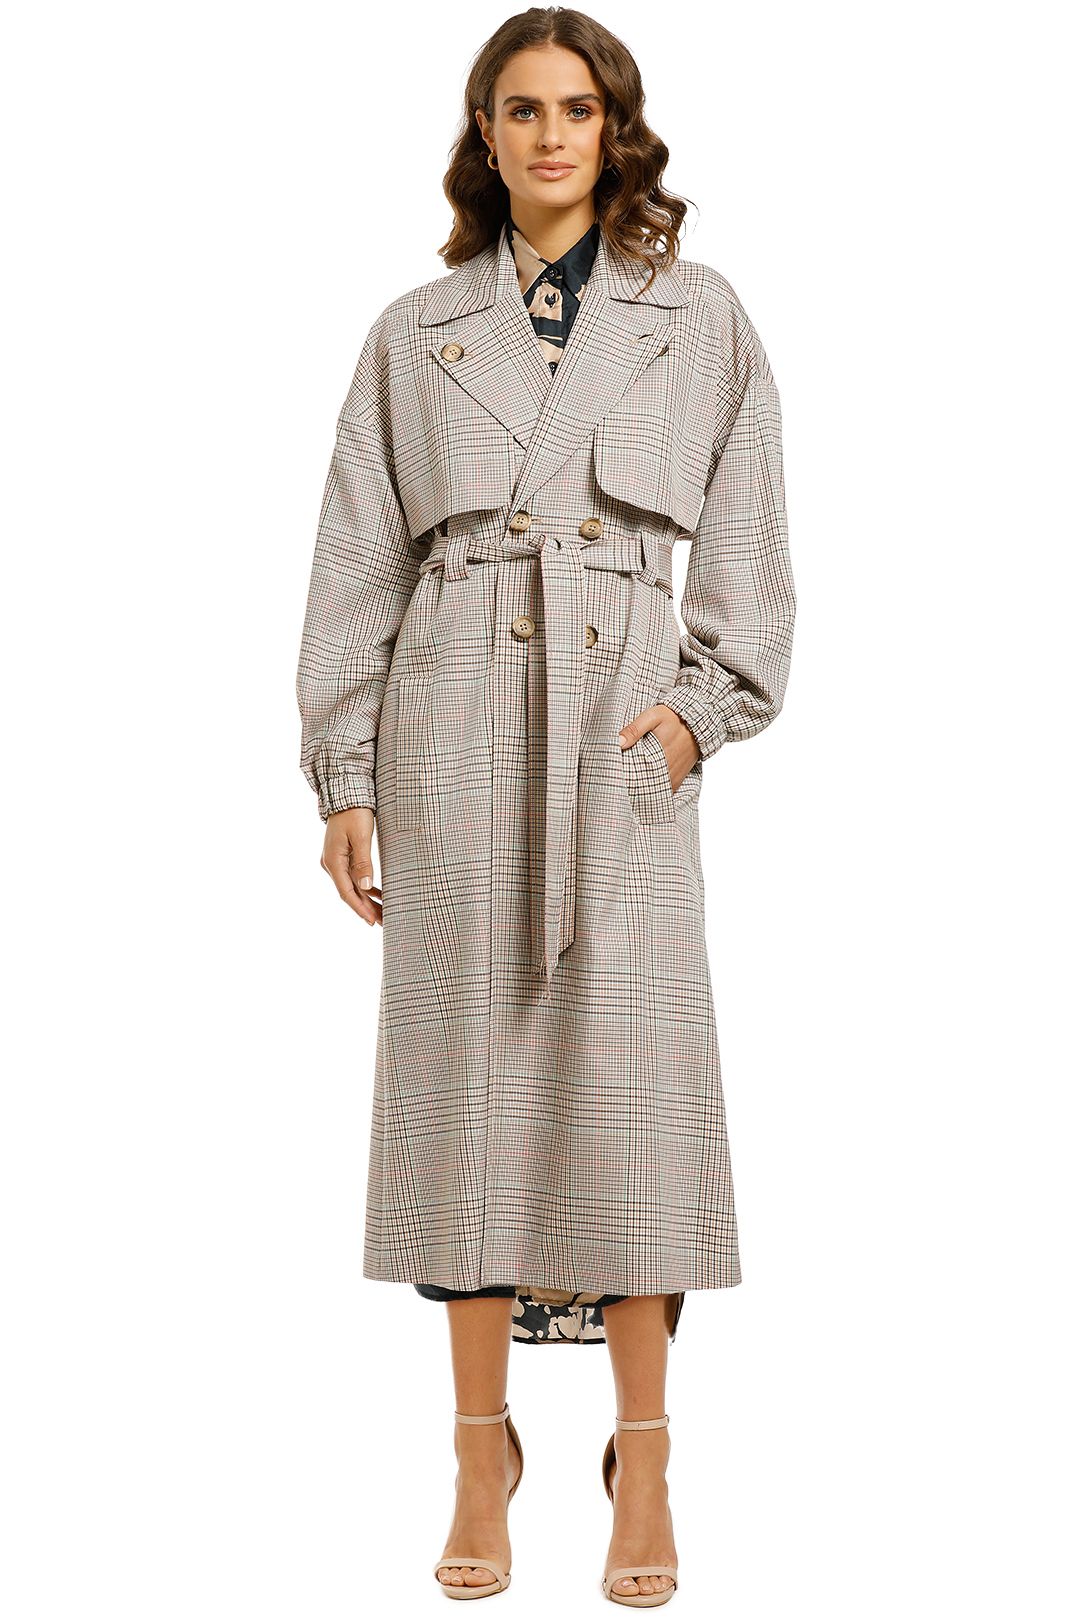 Ginger-and-Smart-Imperial-Trench-Classic-Check-Front